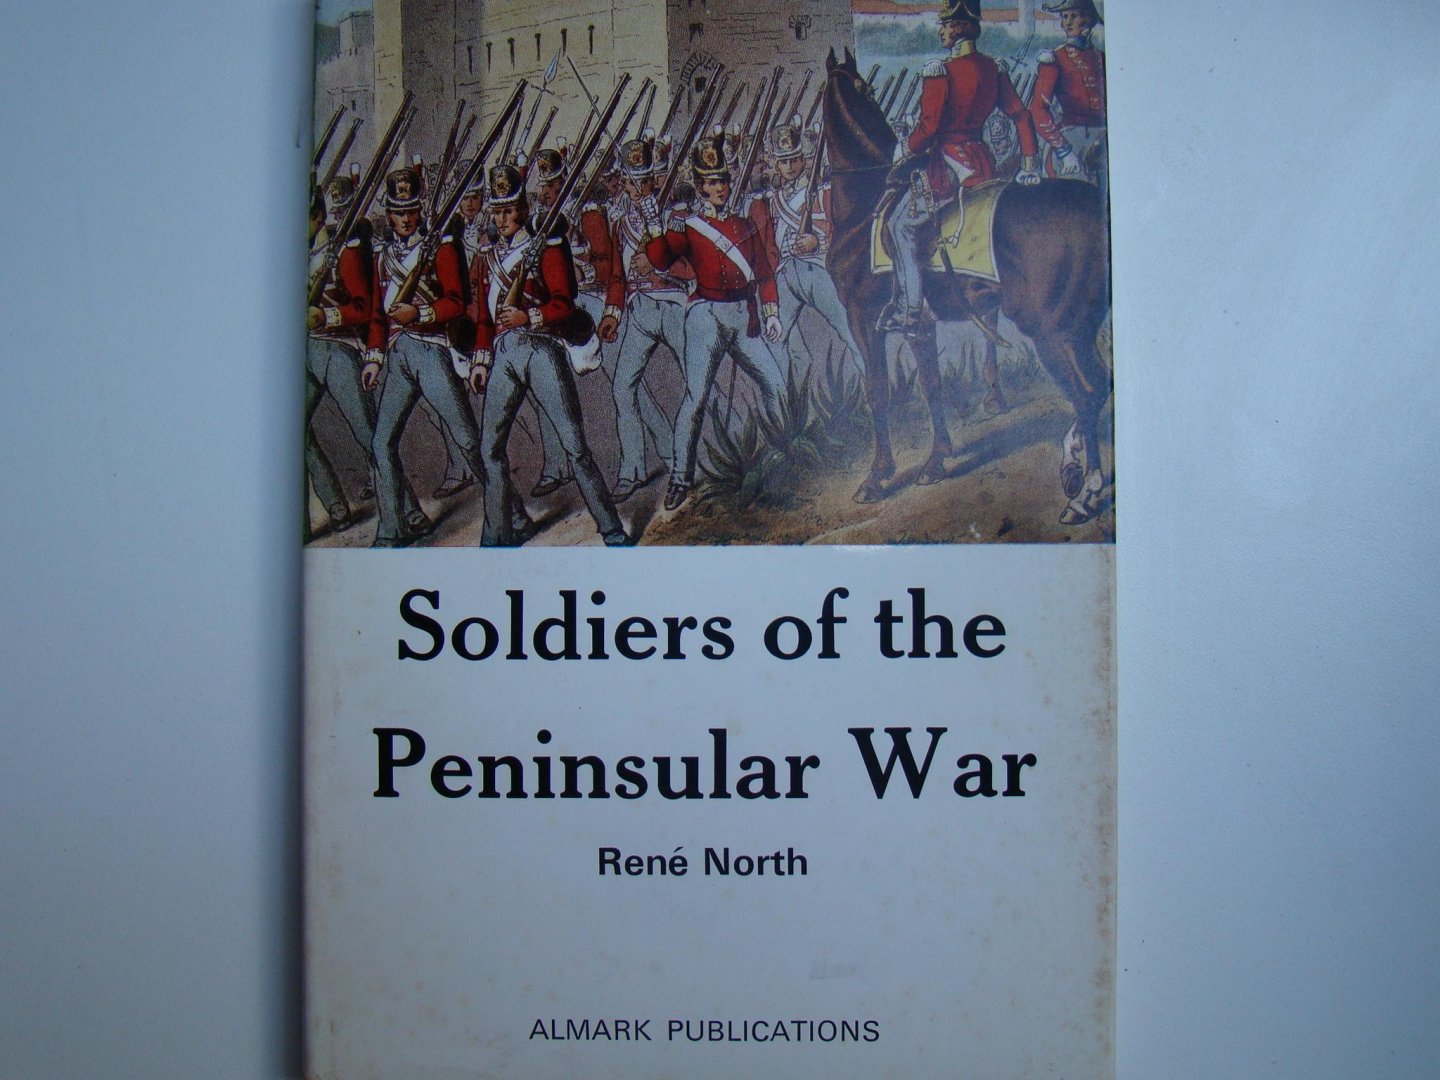 North, Rene - Soldiers of the Peninsular War 1808-1814